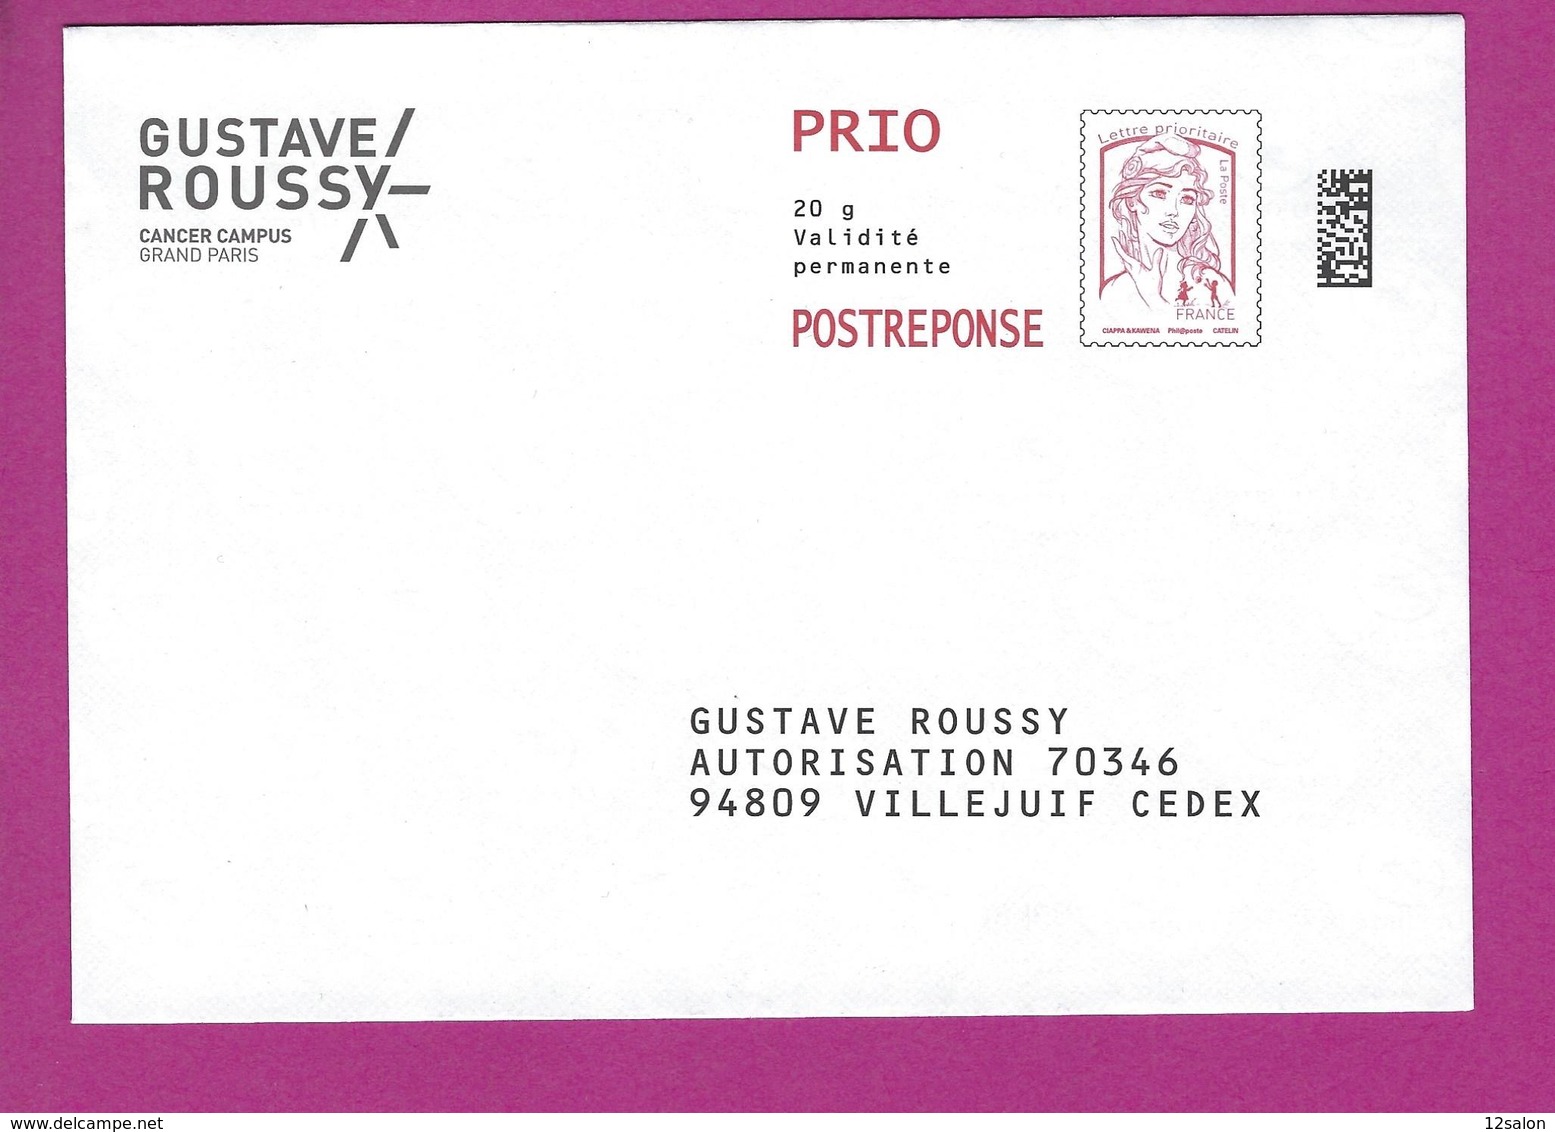 ENTIERS POSTAUX PRET A POSTER REPONSE MARIANNE CIAPPA GUSTAVE ROUSSY CANCER - Cartes/Enveloppes Réponse T